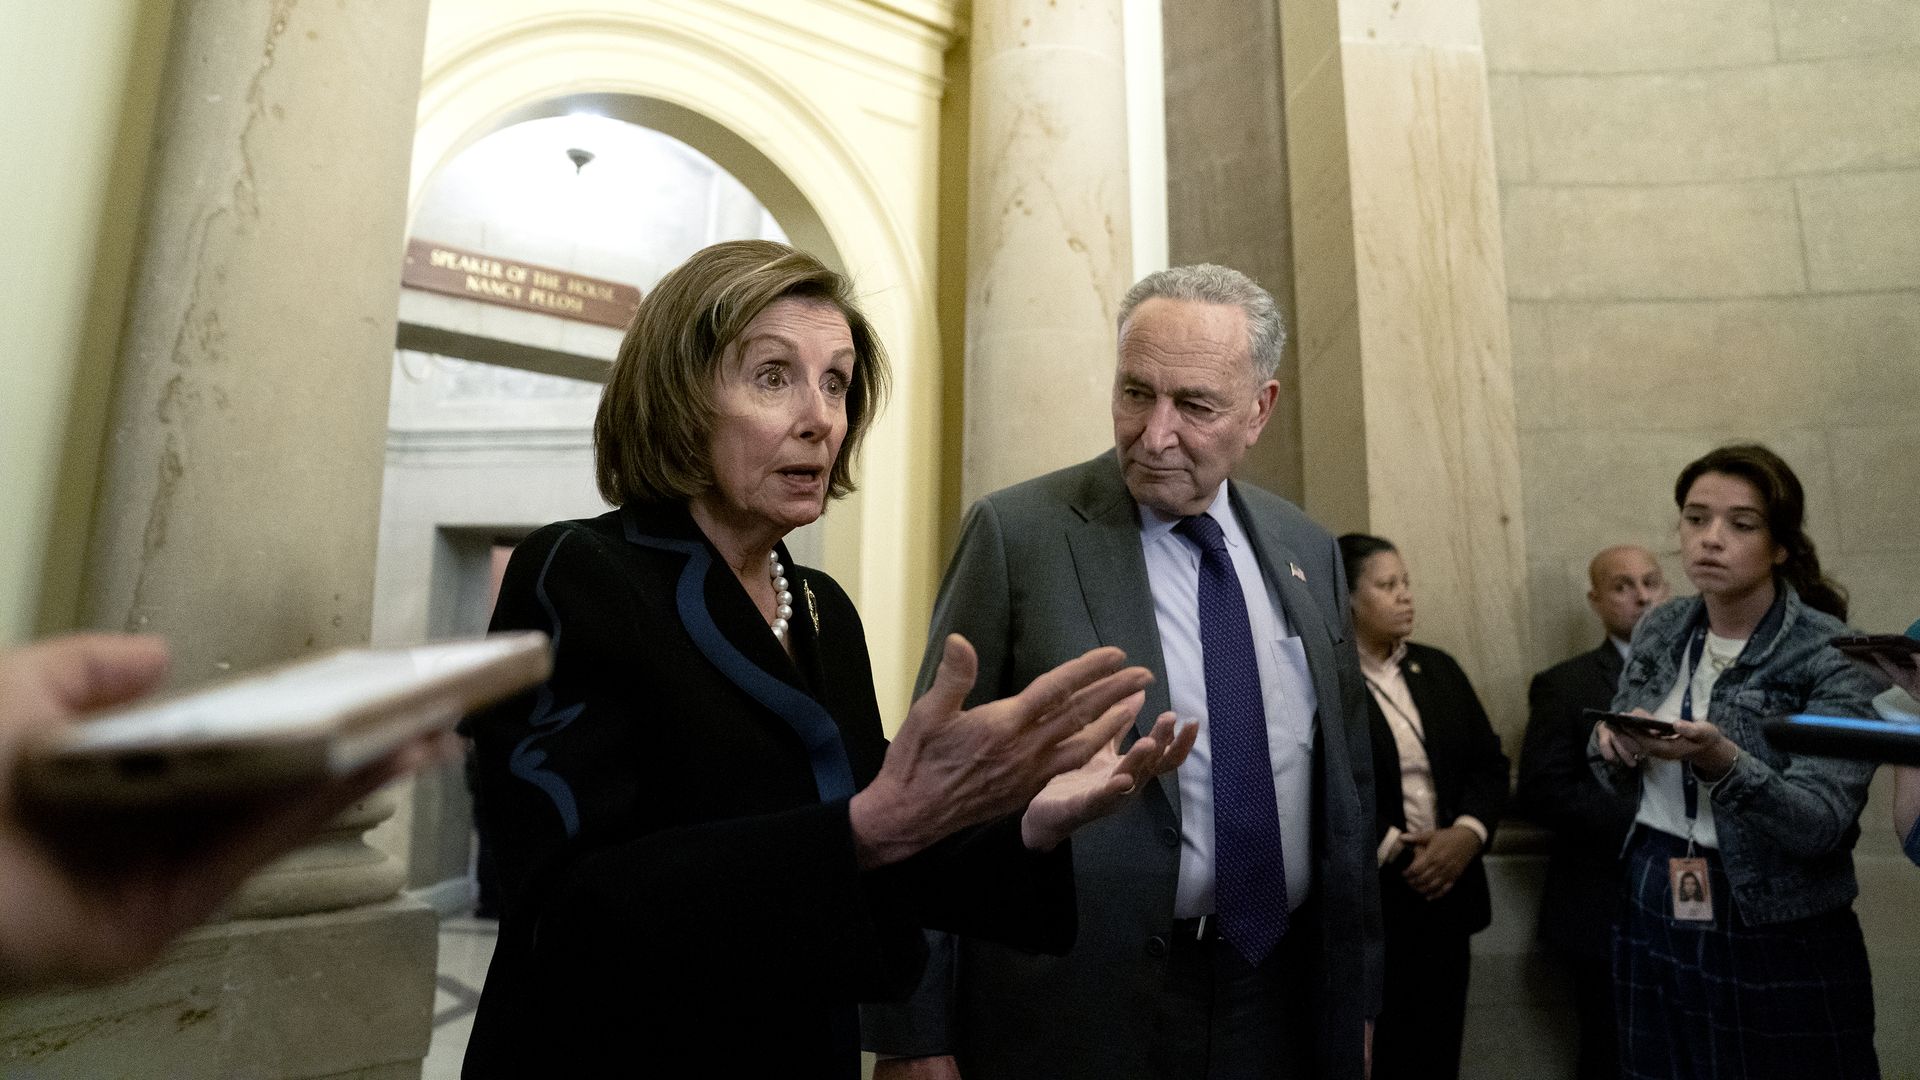 Speaker of the House Nancy Pelosi, a Democrat from California, left, and Senate Majority Leader Chuck Schumer, a Democrat from New York, speak to members of the media 